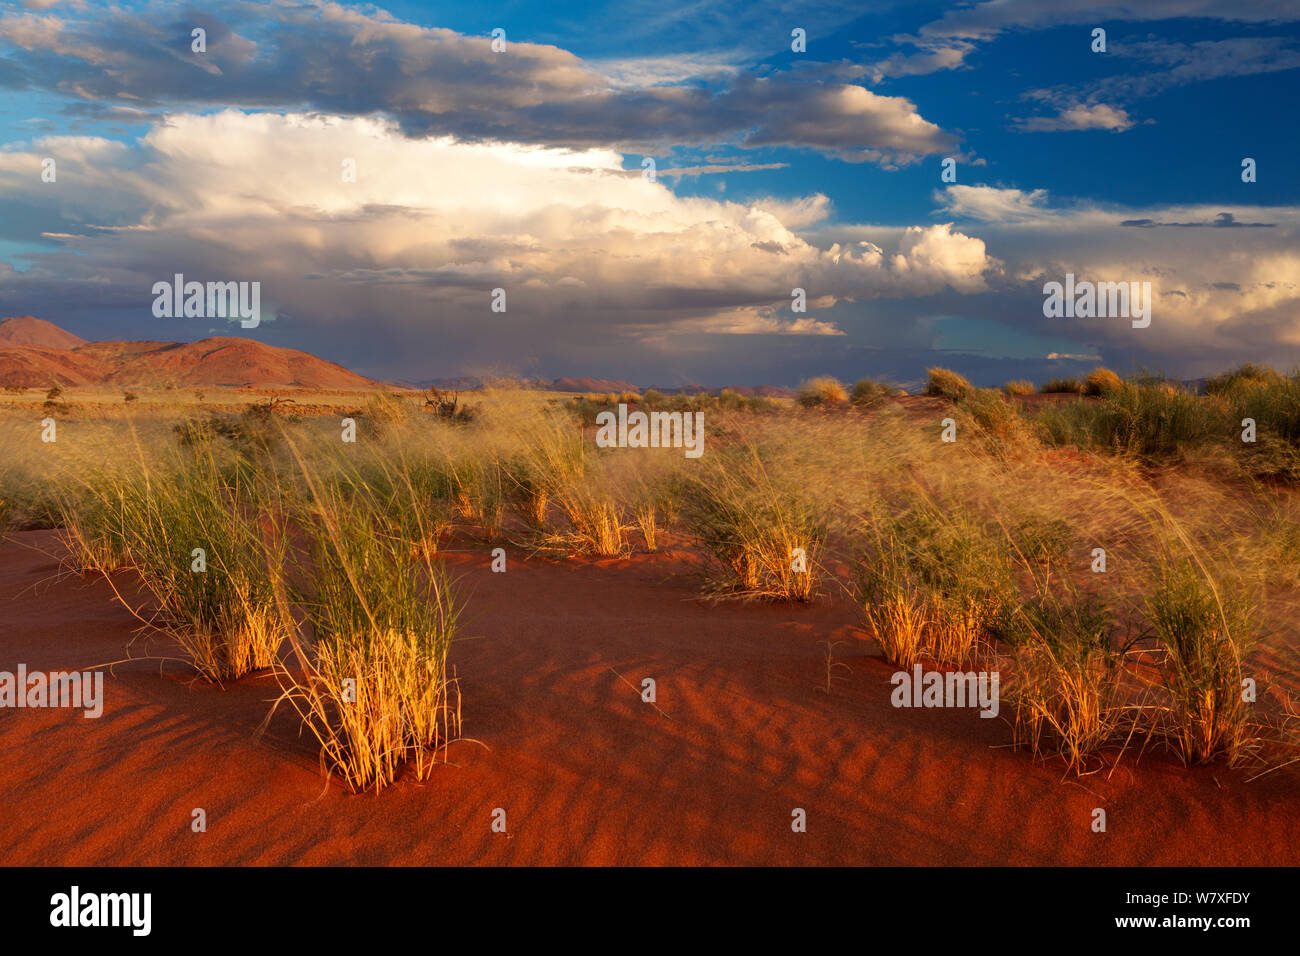 Desert landscape in afternoon sunlight below stormy skies. Namib Rand, Namibia. March 2012. Non-ex. Stock Photo